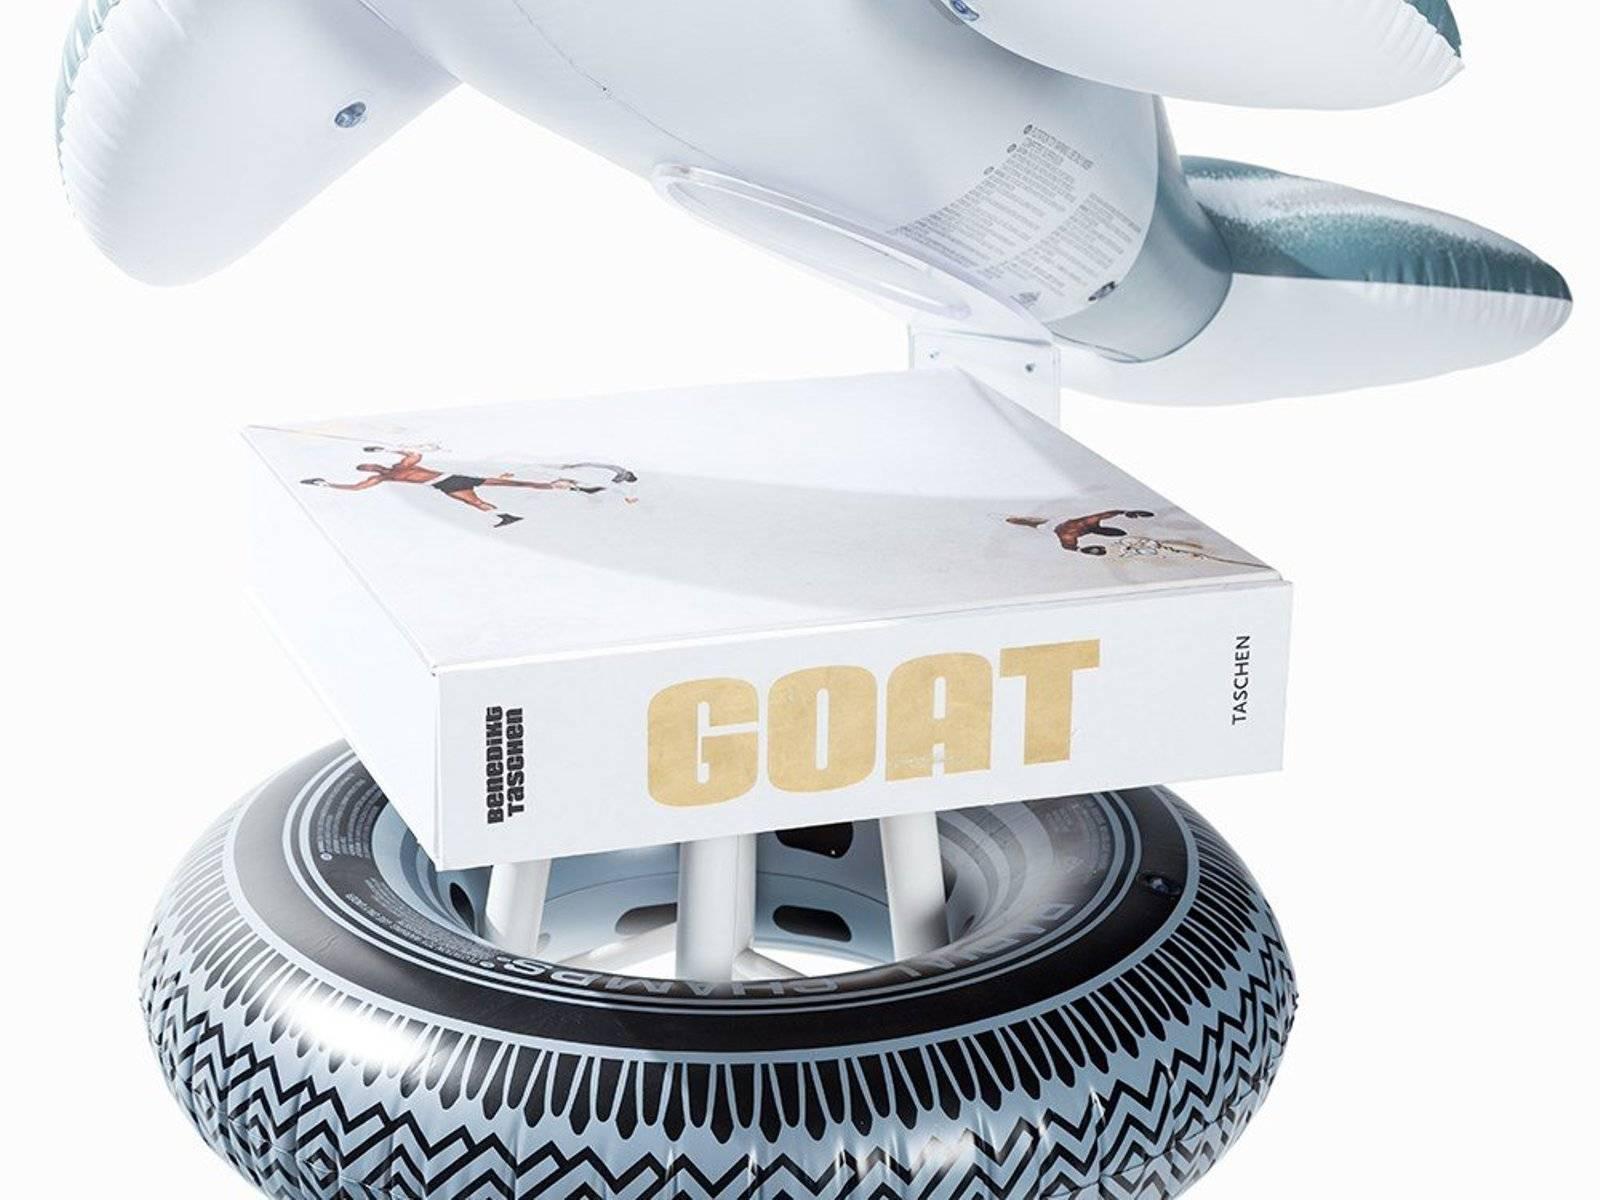 Jeff Koons (American, born 1955)
GOAT: A Tribute to Muhammad Ali (Champ’s Edition), 2004
Sculpture installation: Titled “Radial Champs” and consisting of a blow-up dolphin, a tire sculpture, and stool (175 x 170 cm)
Book: Hardcover Book in Clamshell